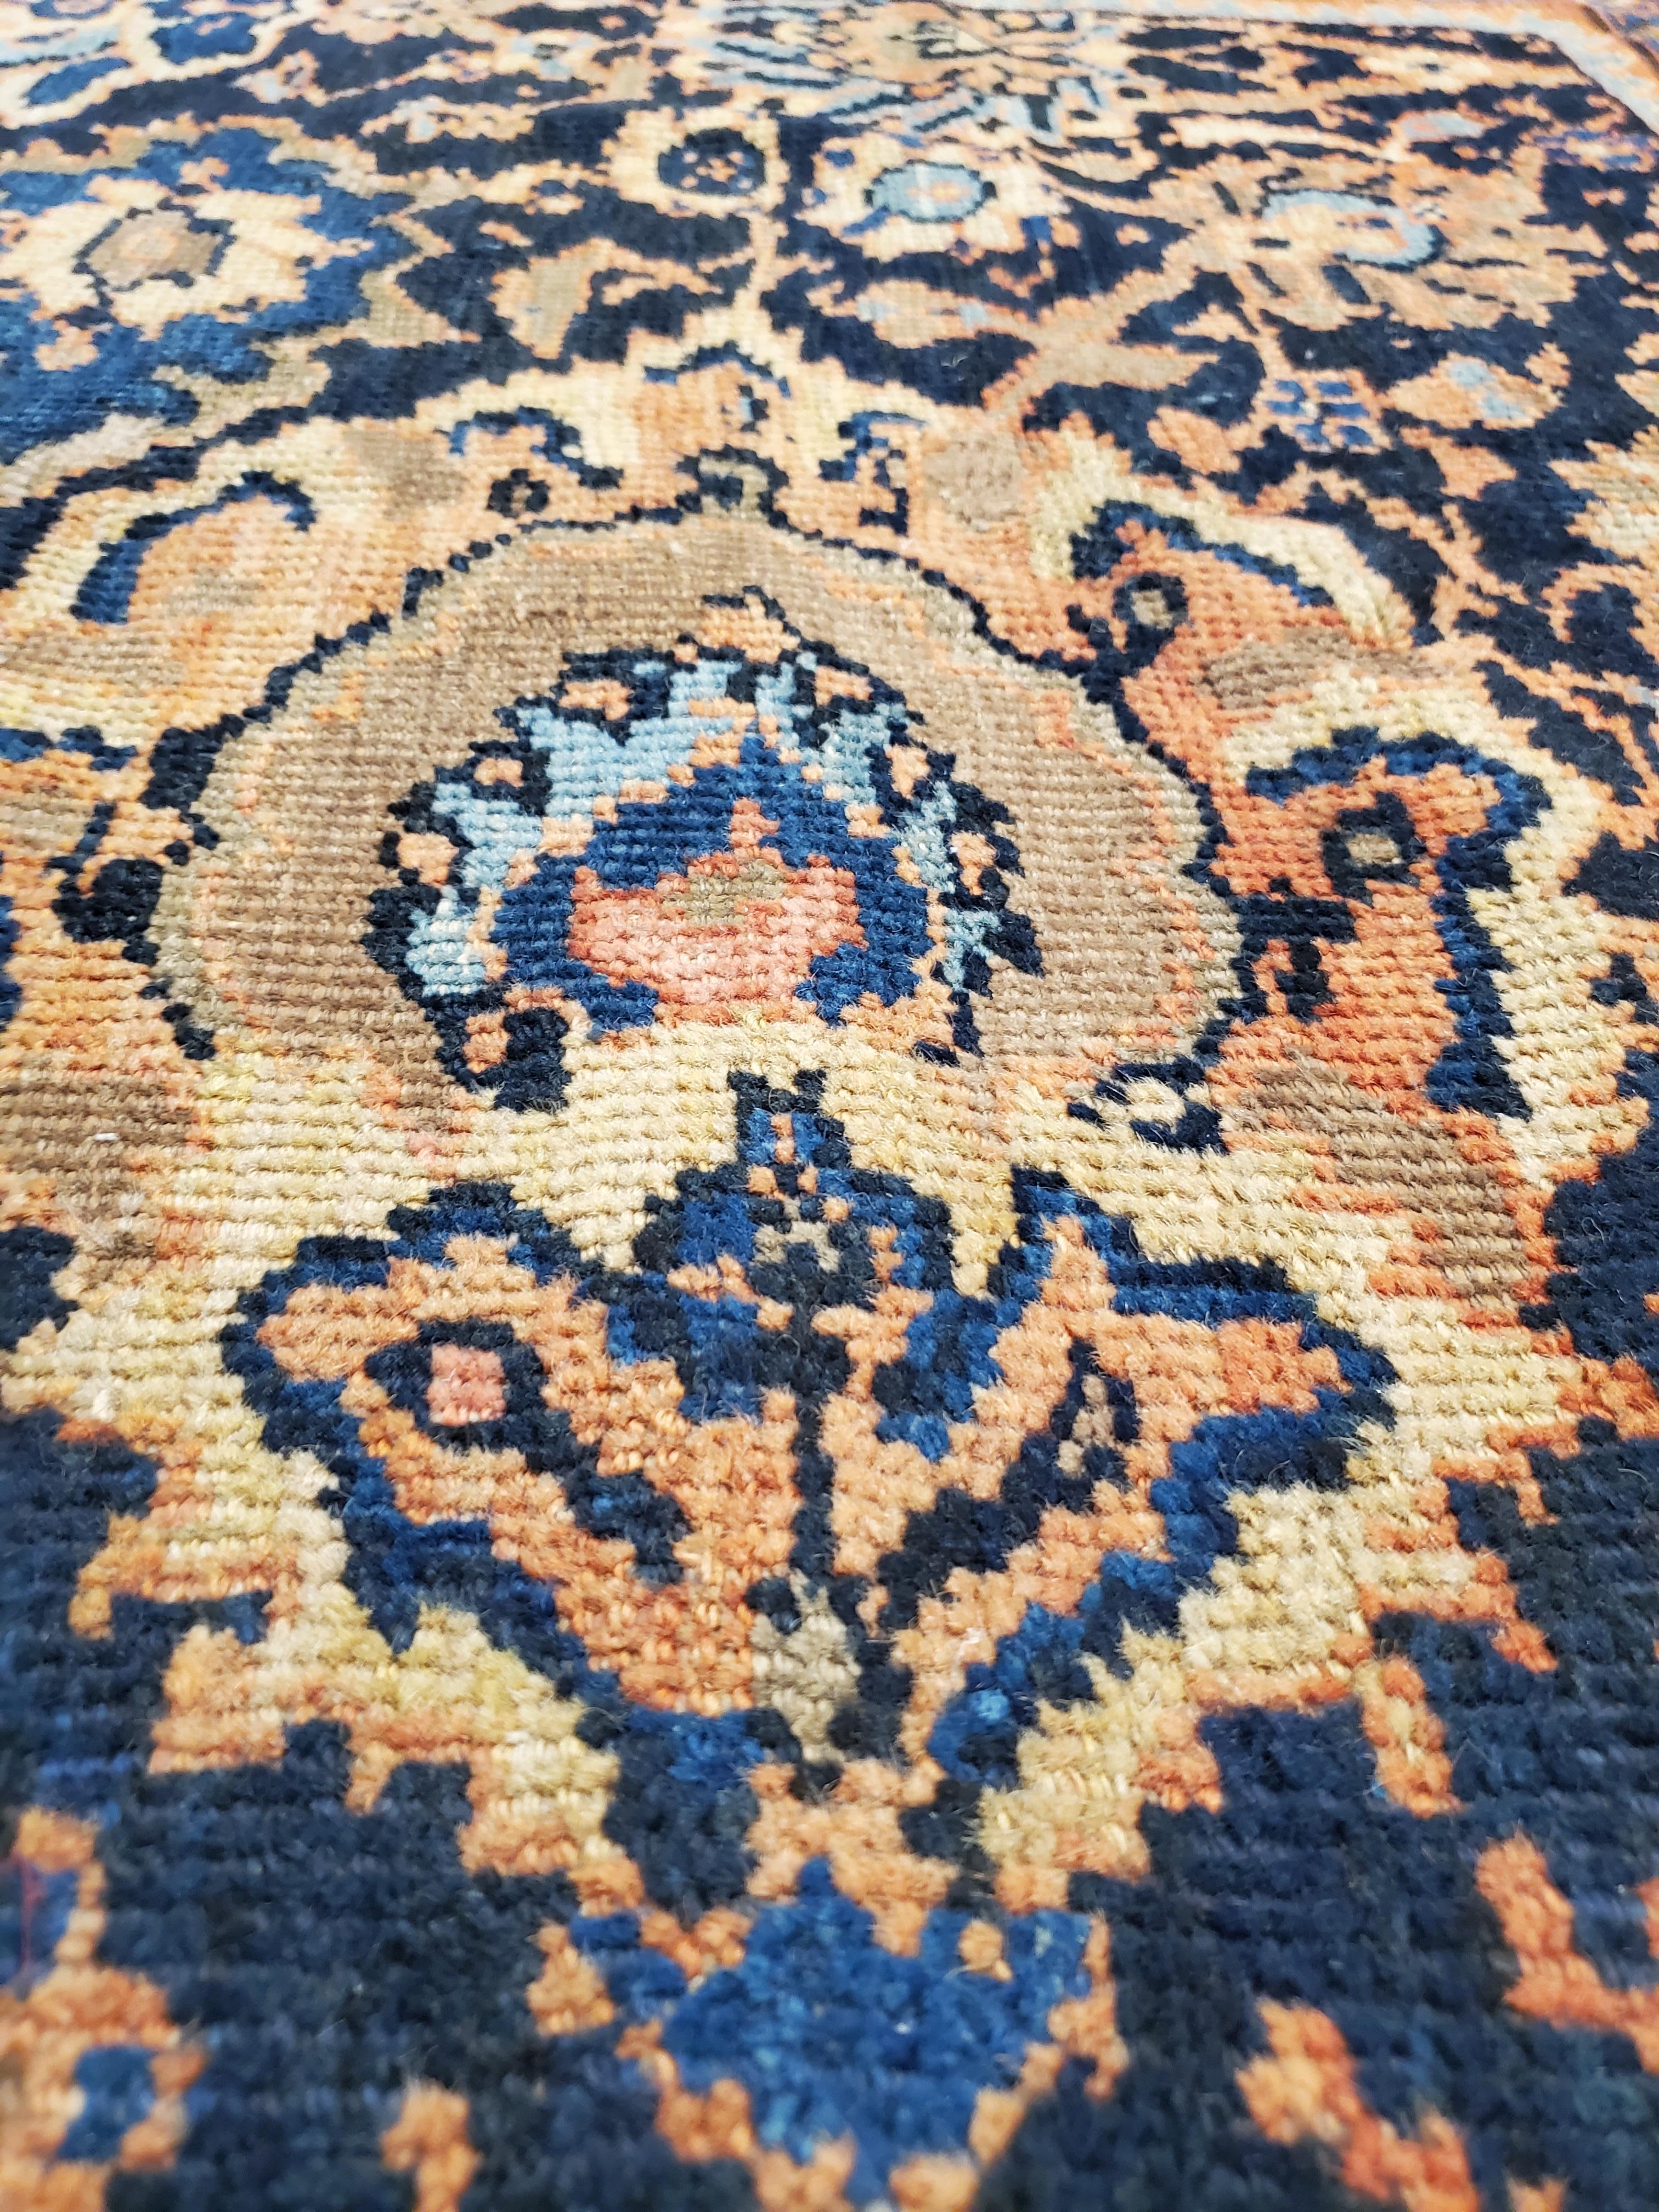 19th Century Antique Persian Sultanabad Carpet, Handmade Oriental Rug, Navy Blue, Rust, Gold For Sale